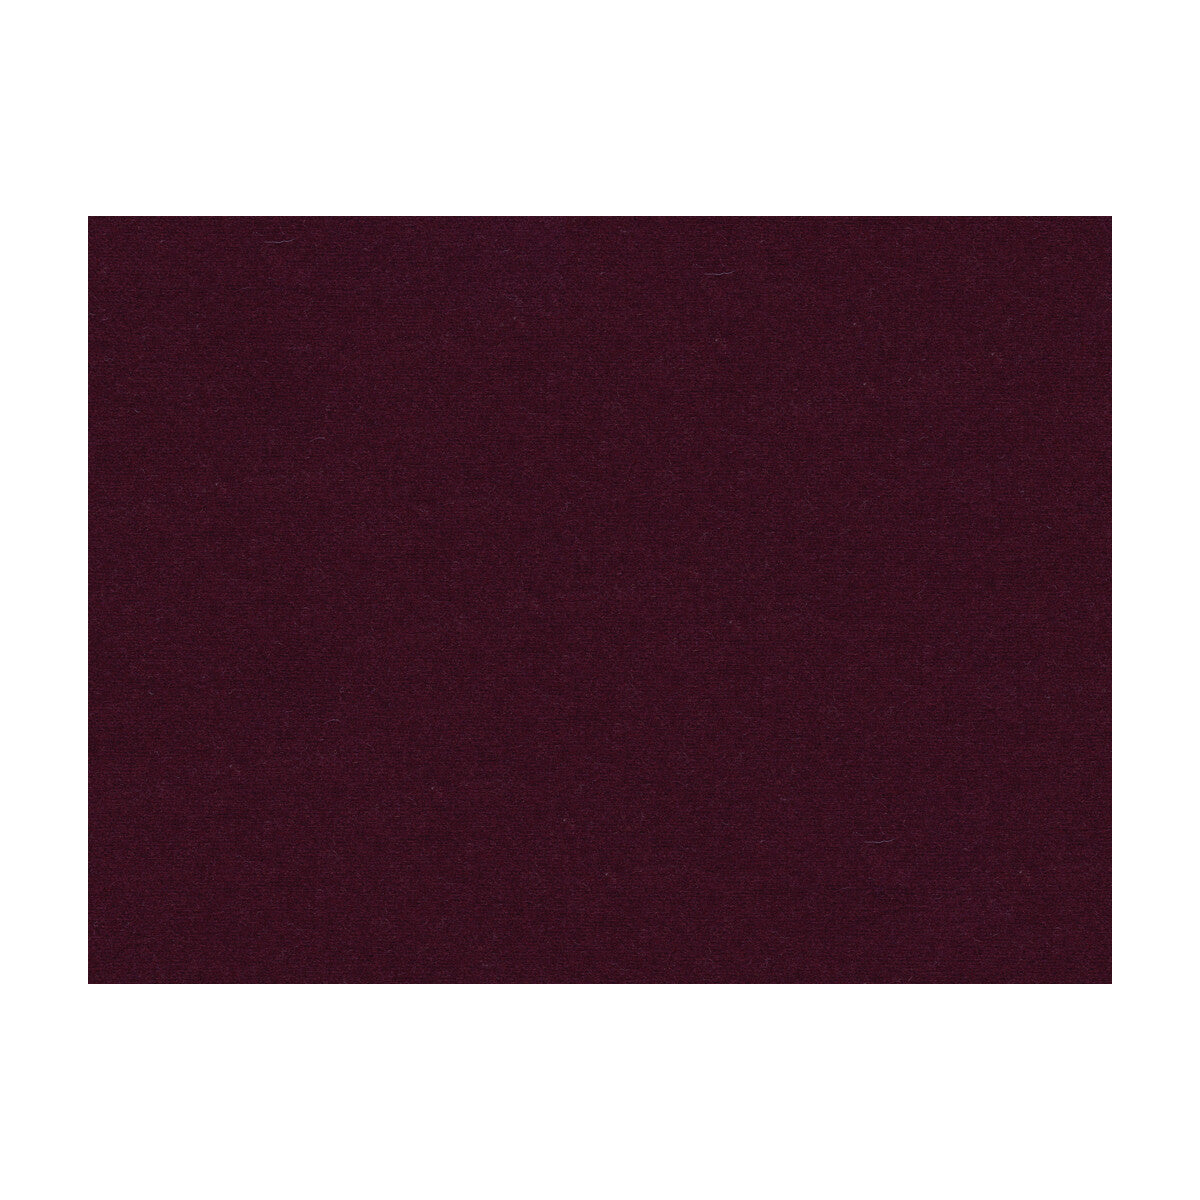 Chevalier Wool fabric in wine color - pattern 8013149.9.0 - by Brunschwig &amp; Fils